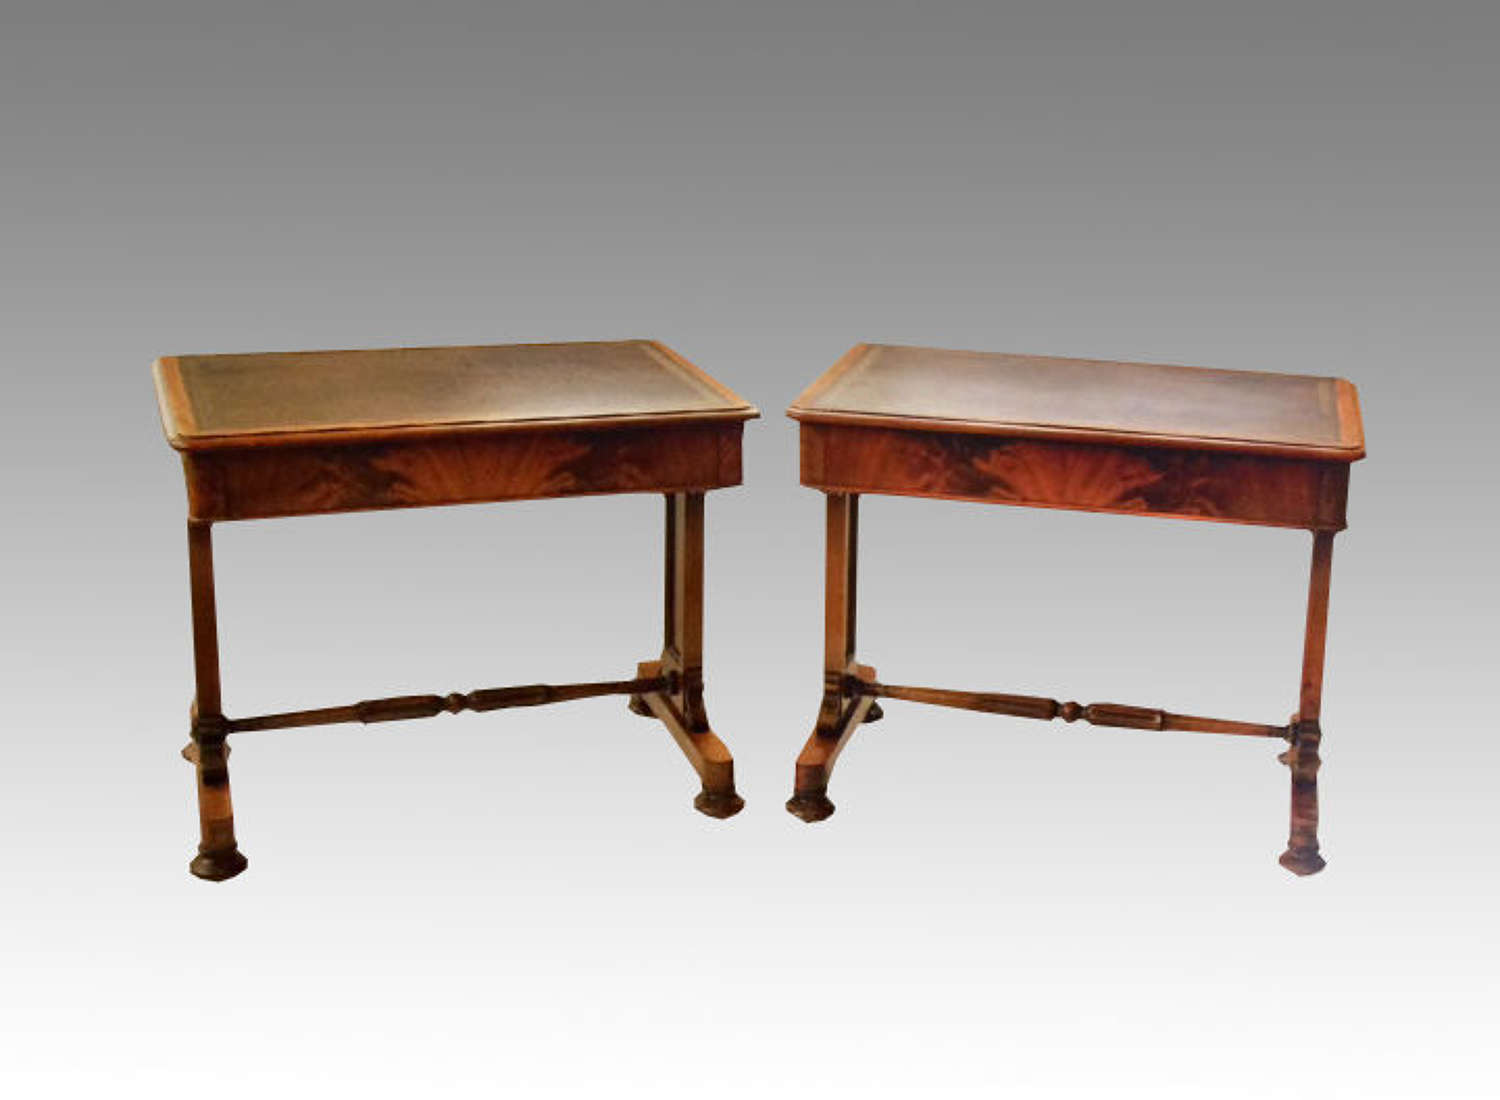 A pair of antique William IV mahogany writing tables.